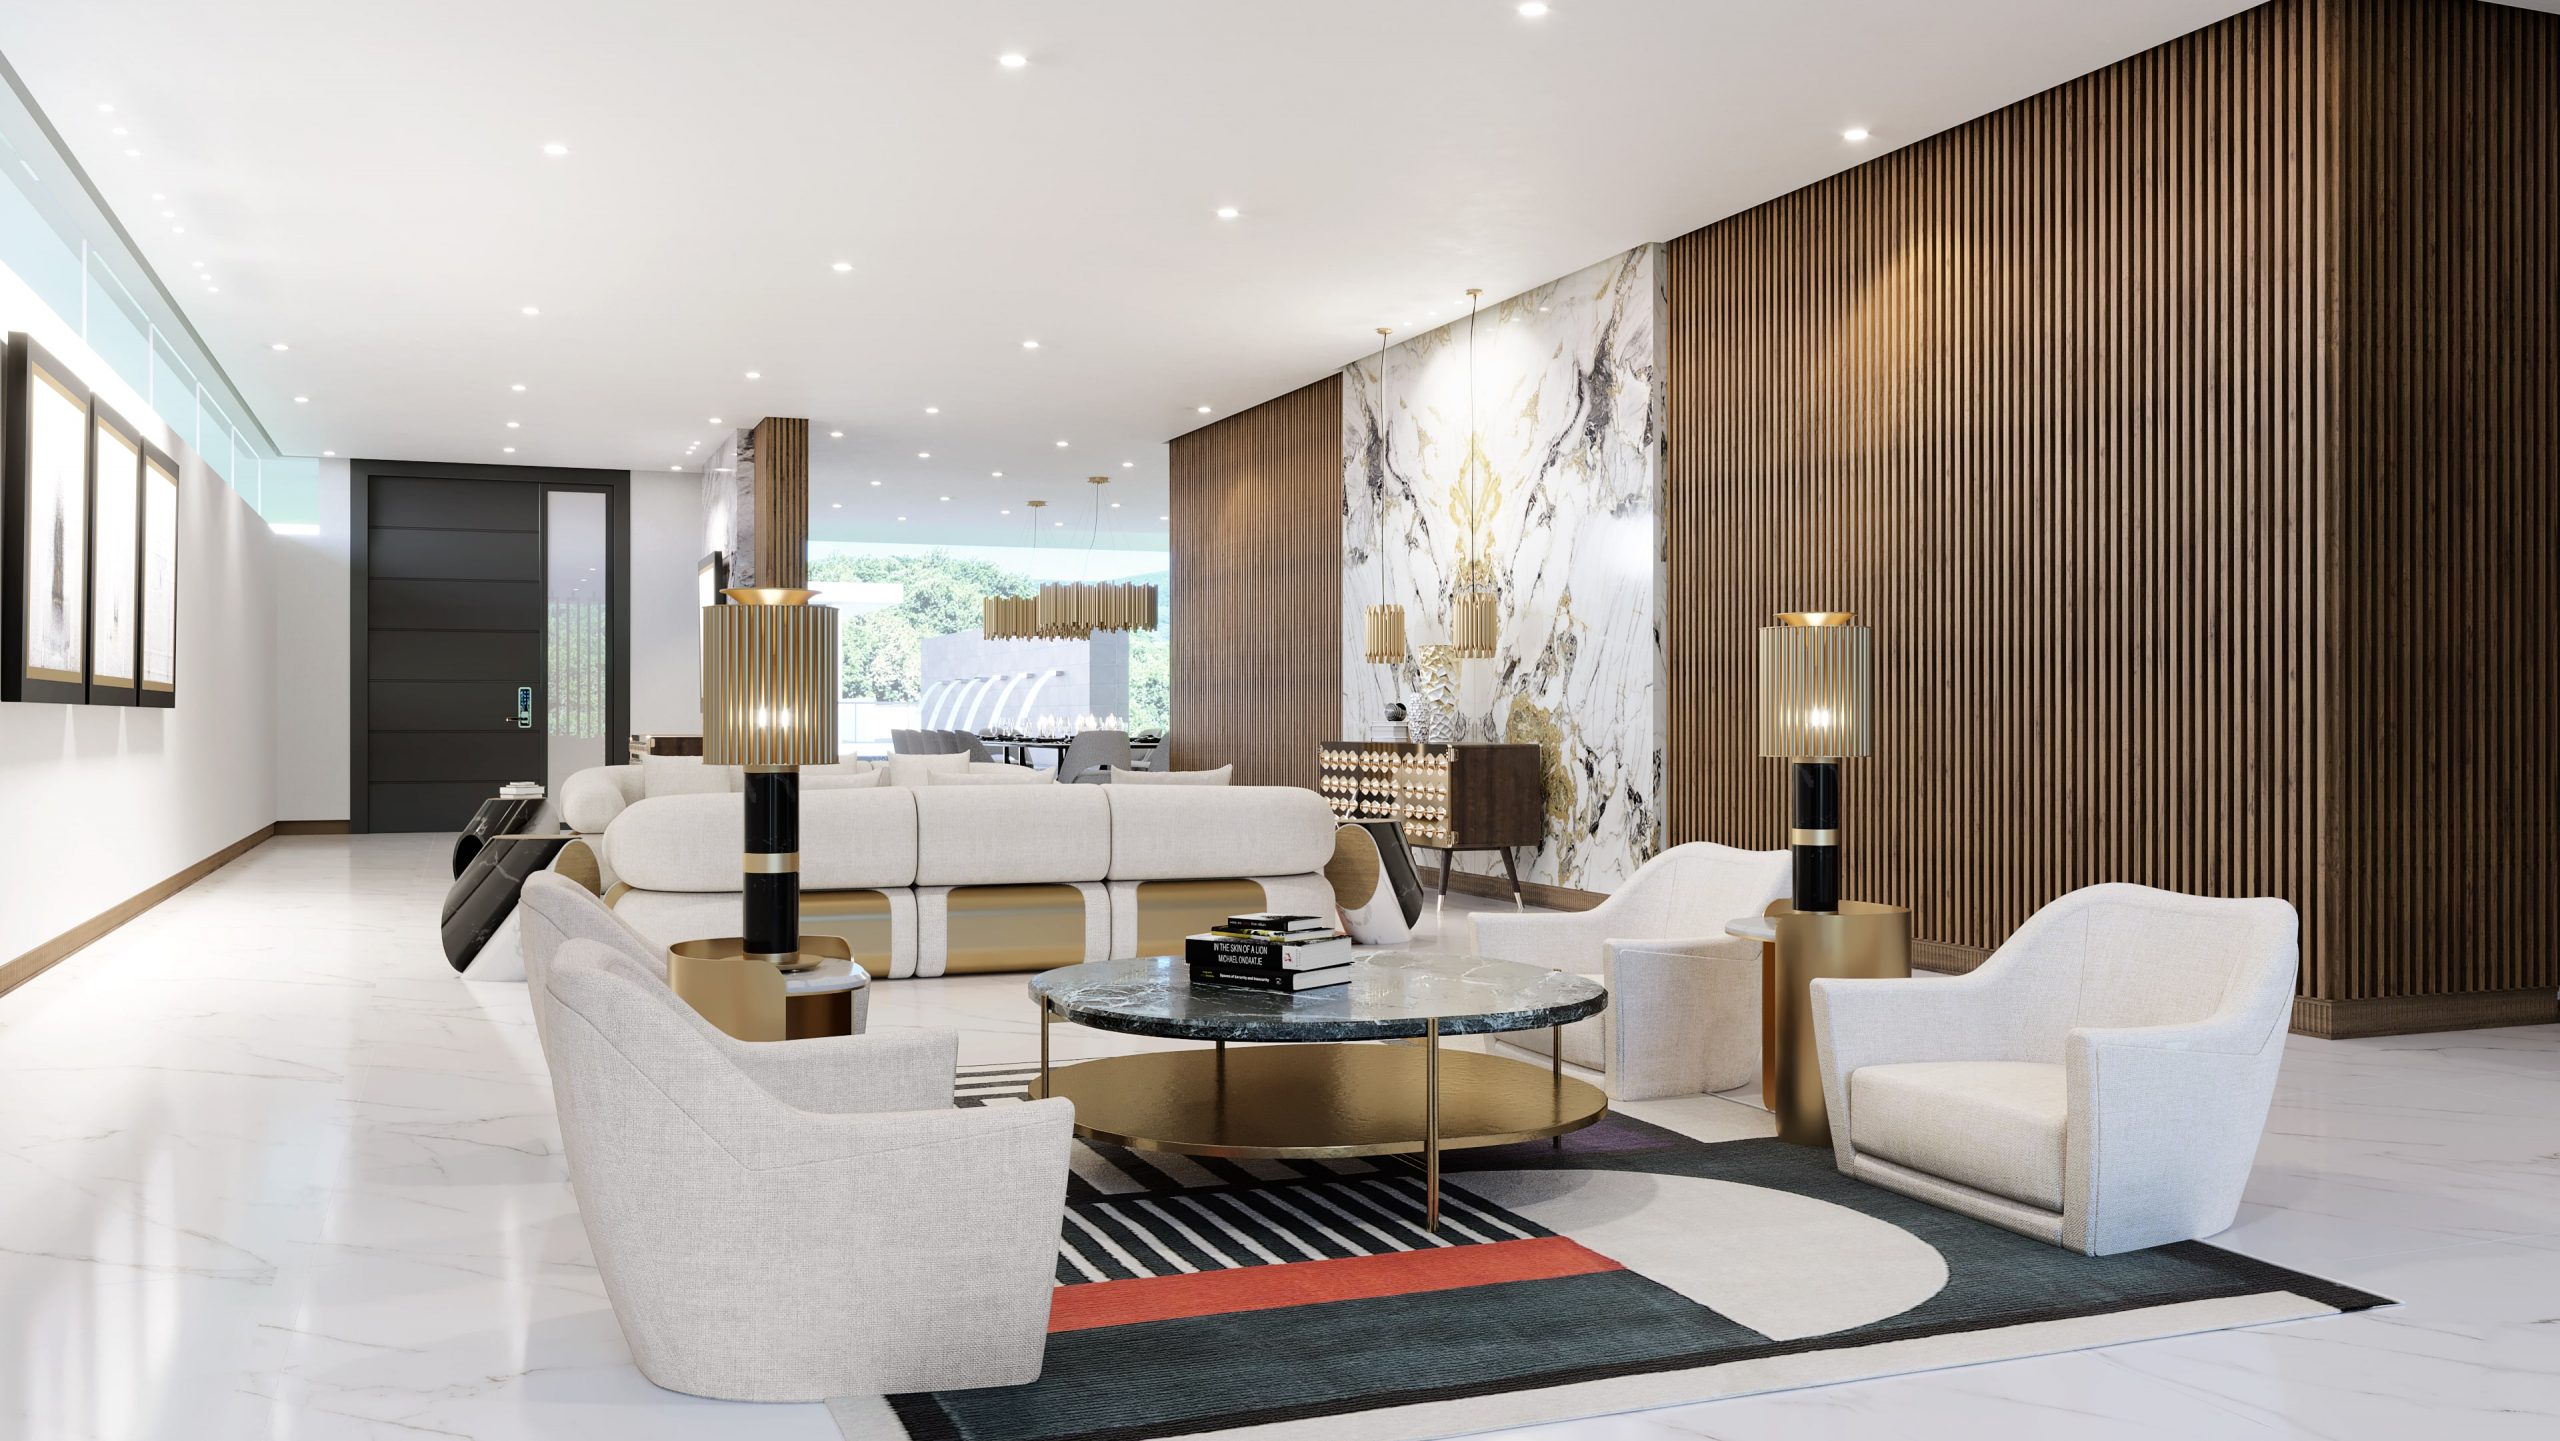 GET INSPIRED BY THIS LUXURY LIVING ROOM IN THE PHILIPPINES